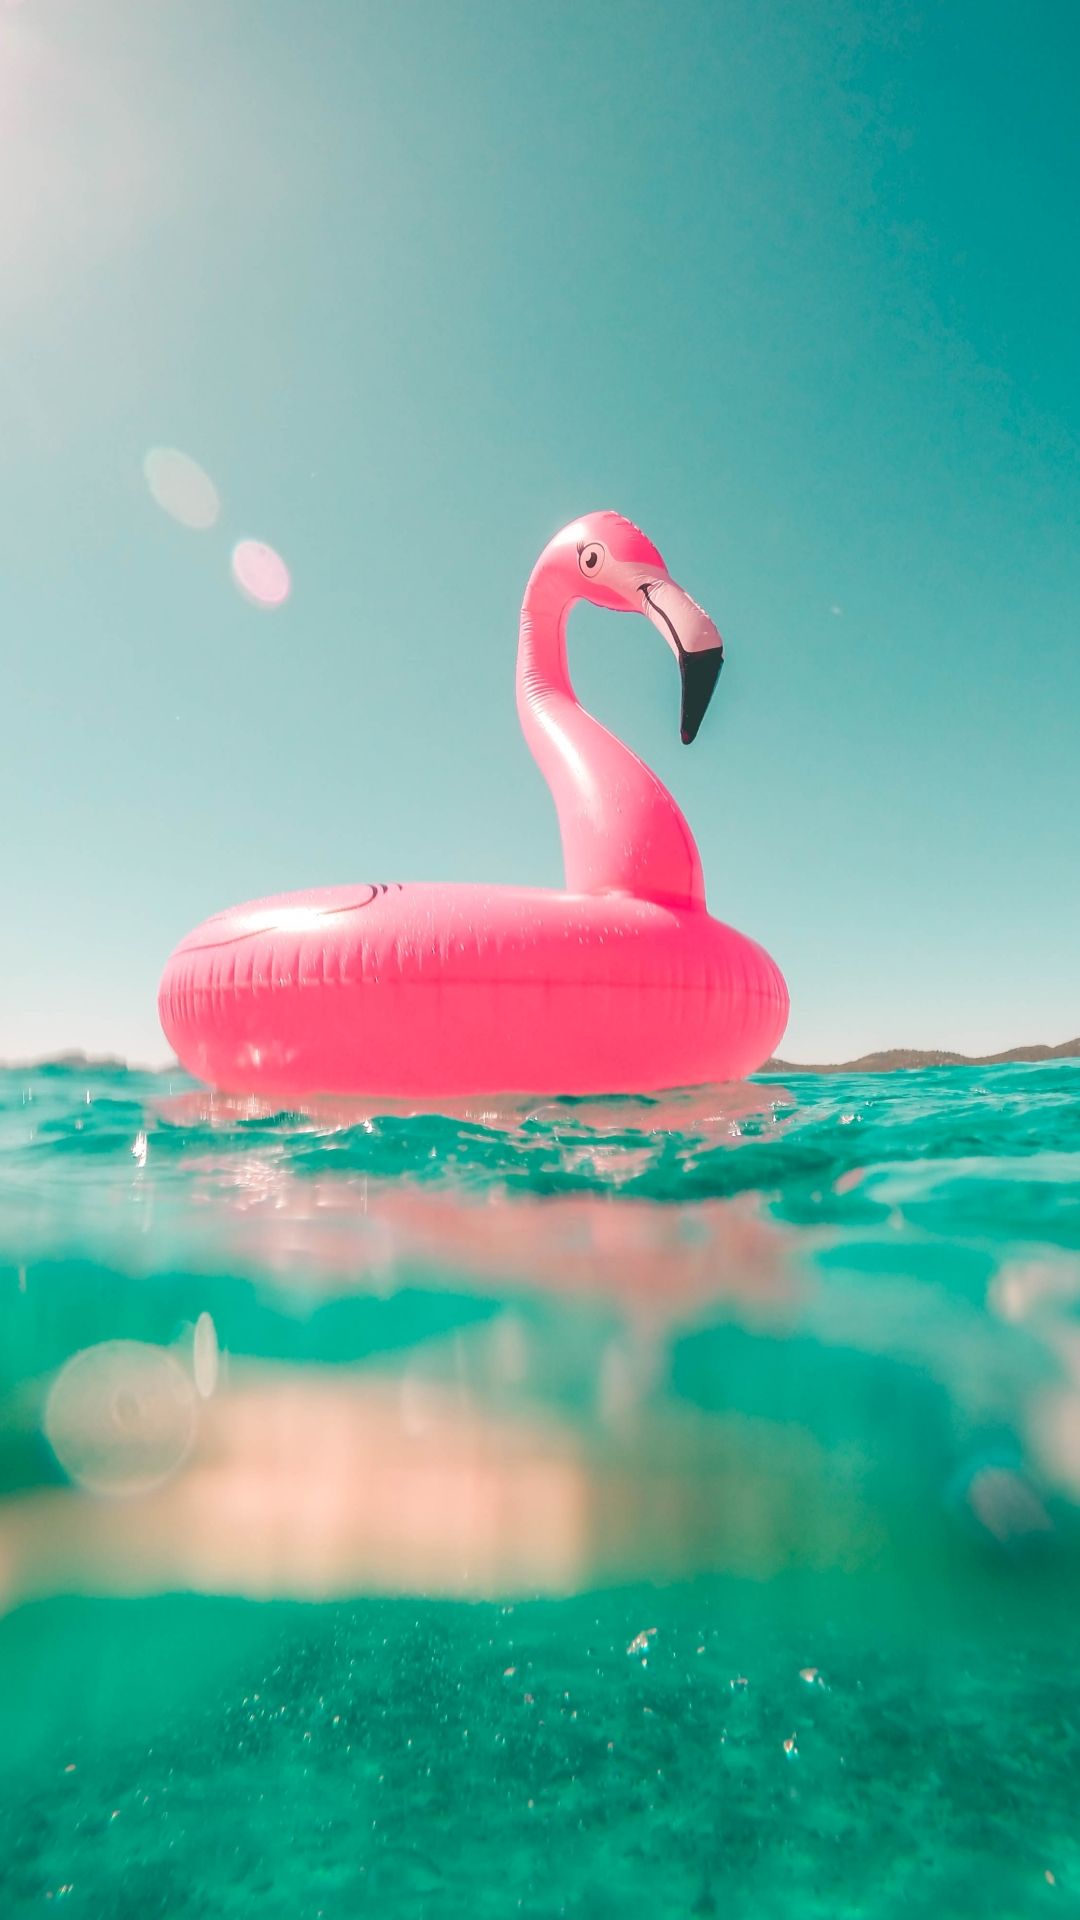 A pink flamingo is floating in the water - Pink, turquoise